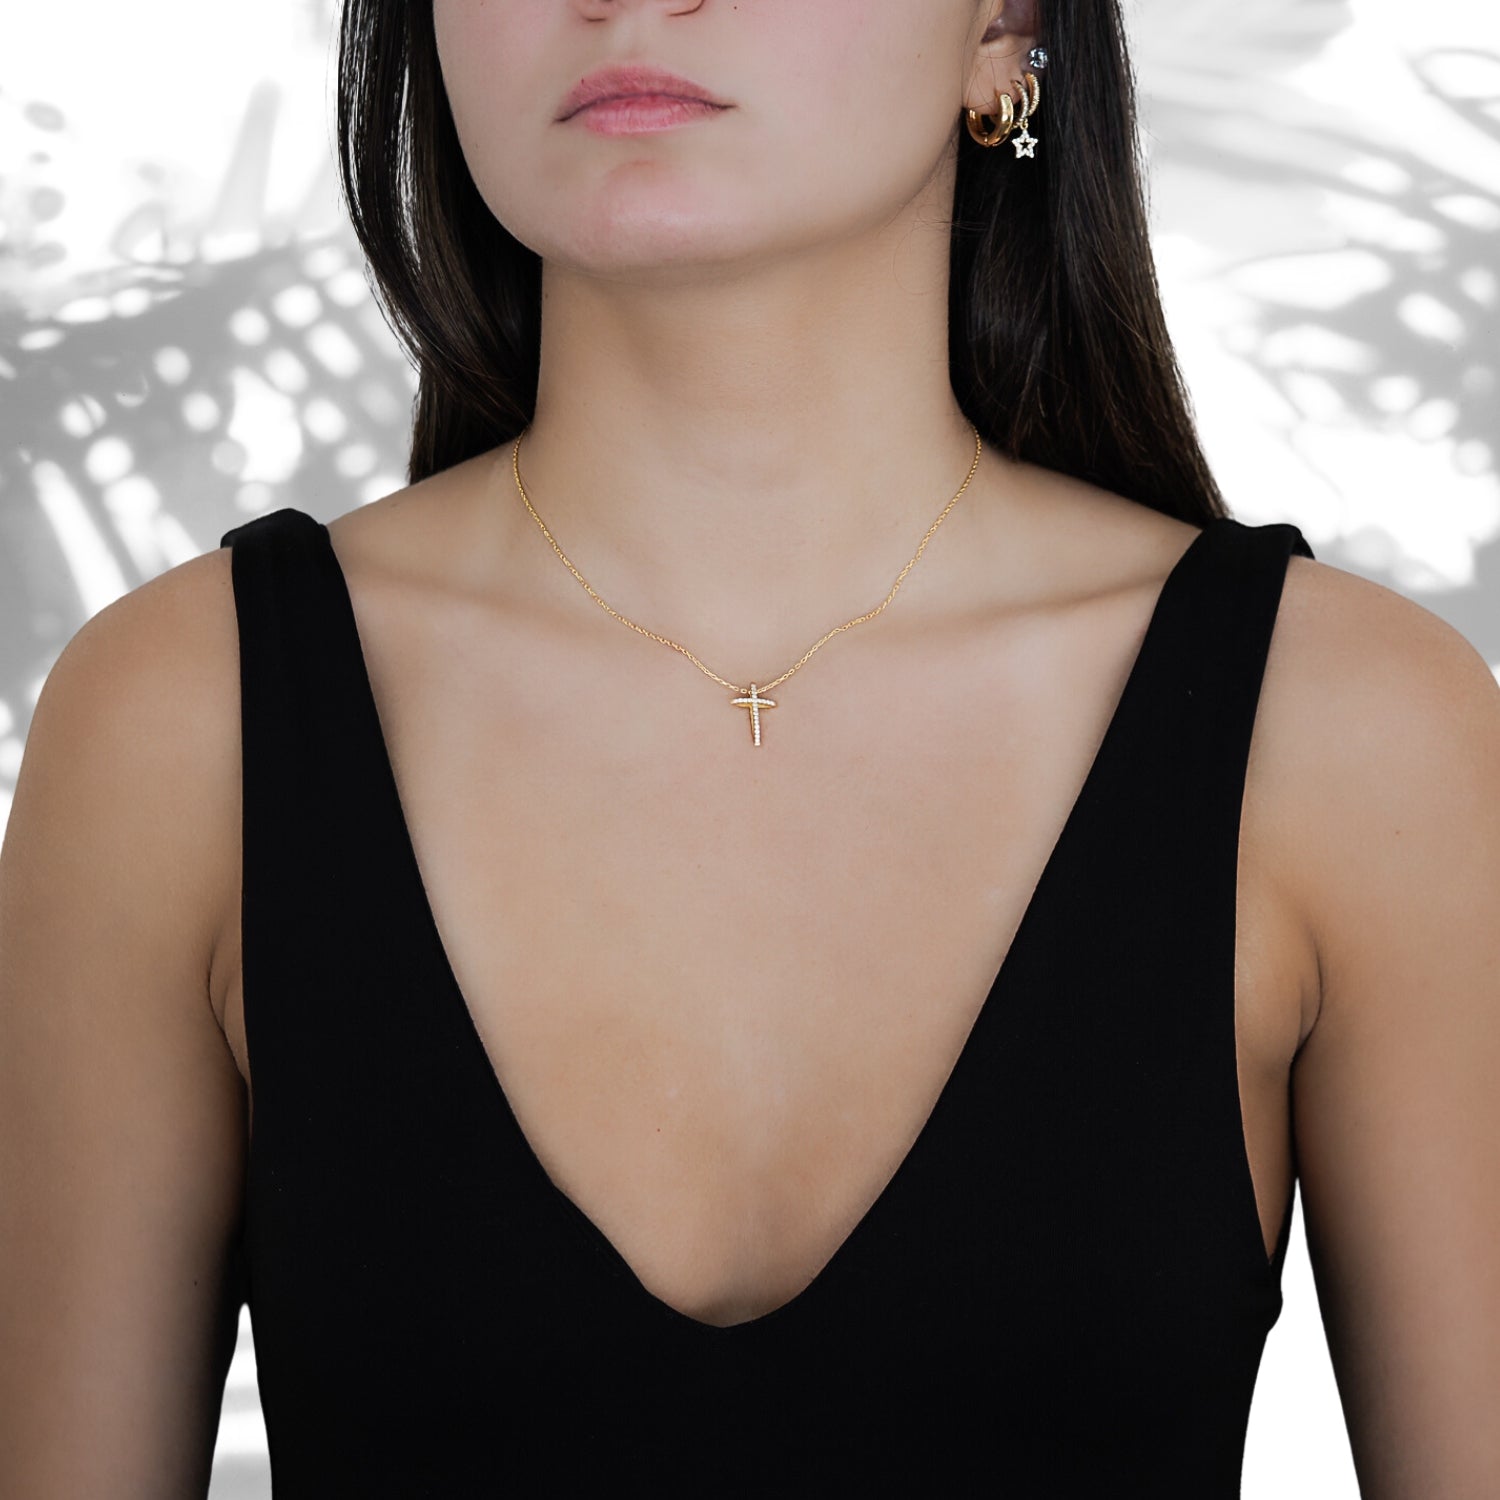 The Unique Cross Diamond Necklace beautifully complementing the model's outfit with its sparkle and unique design.